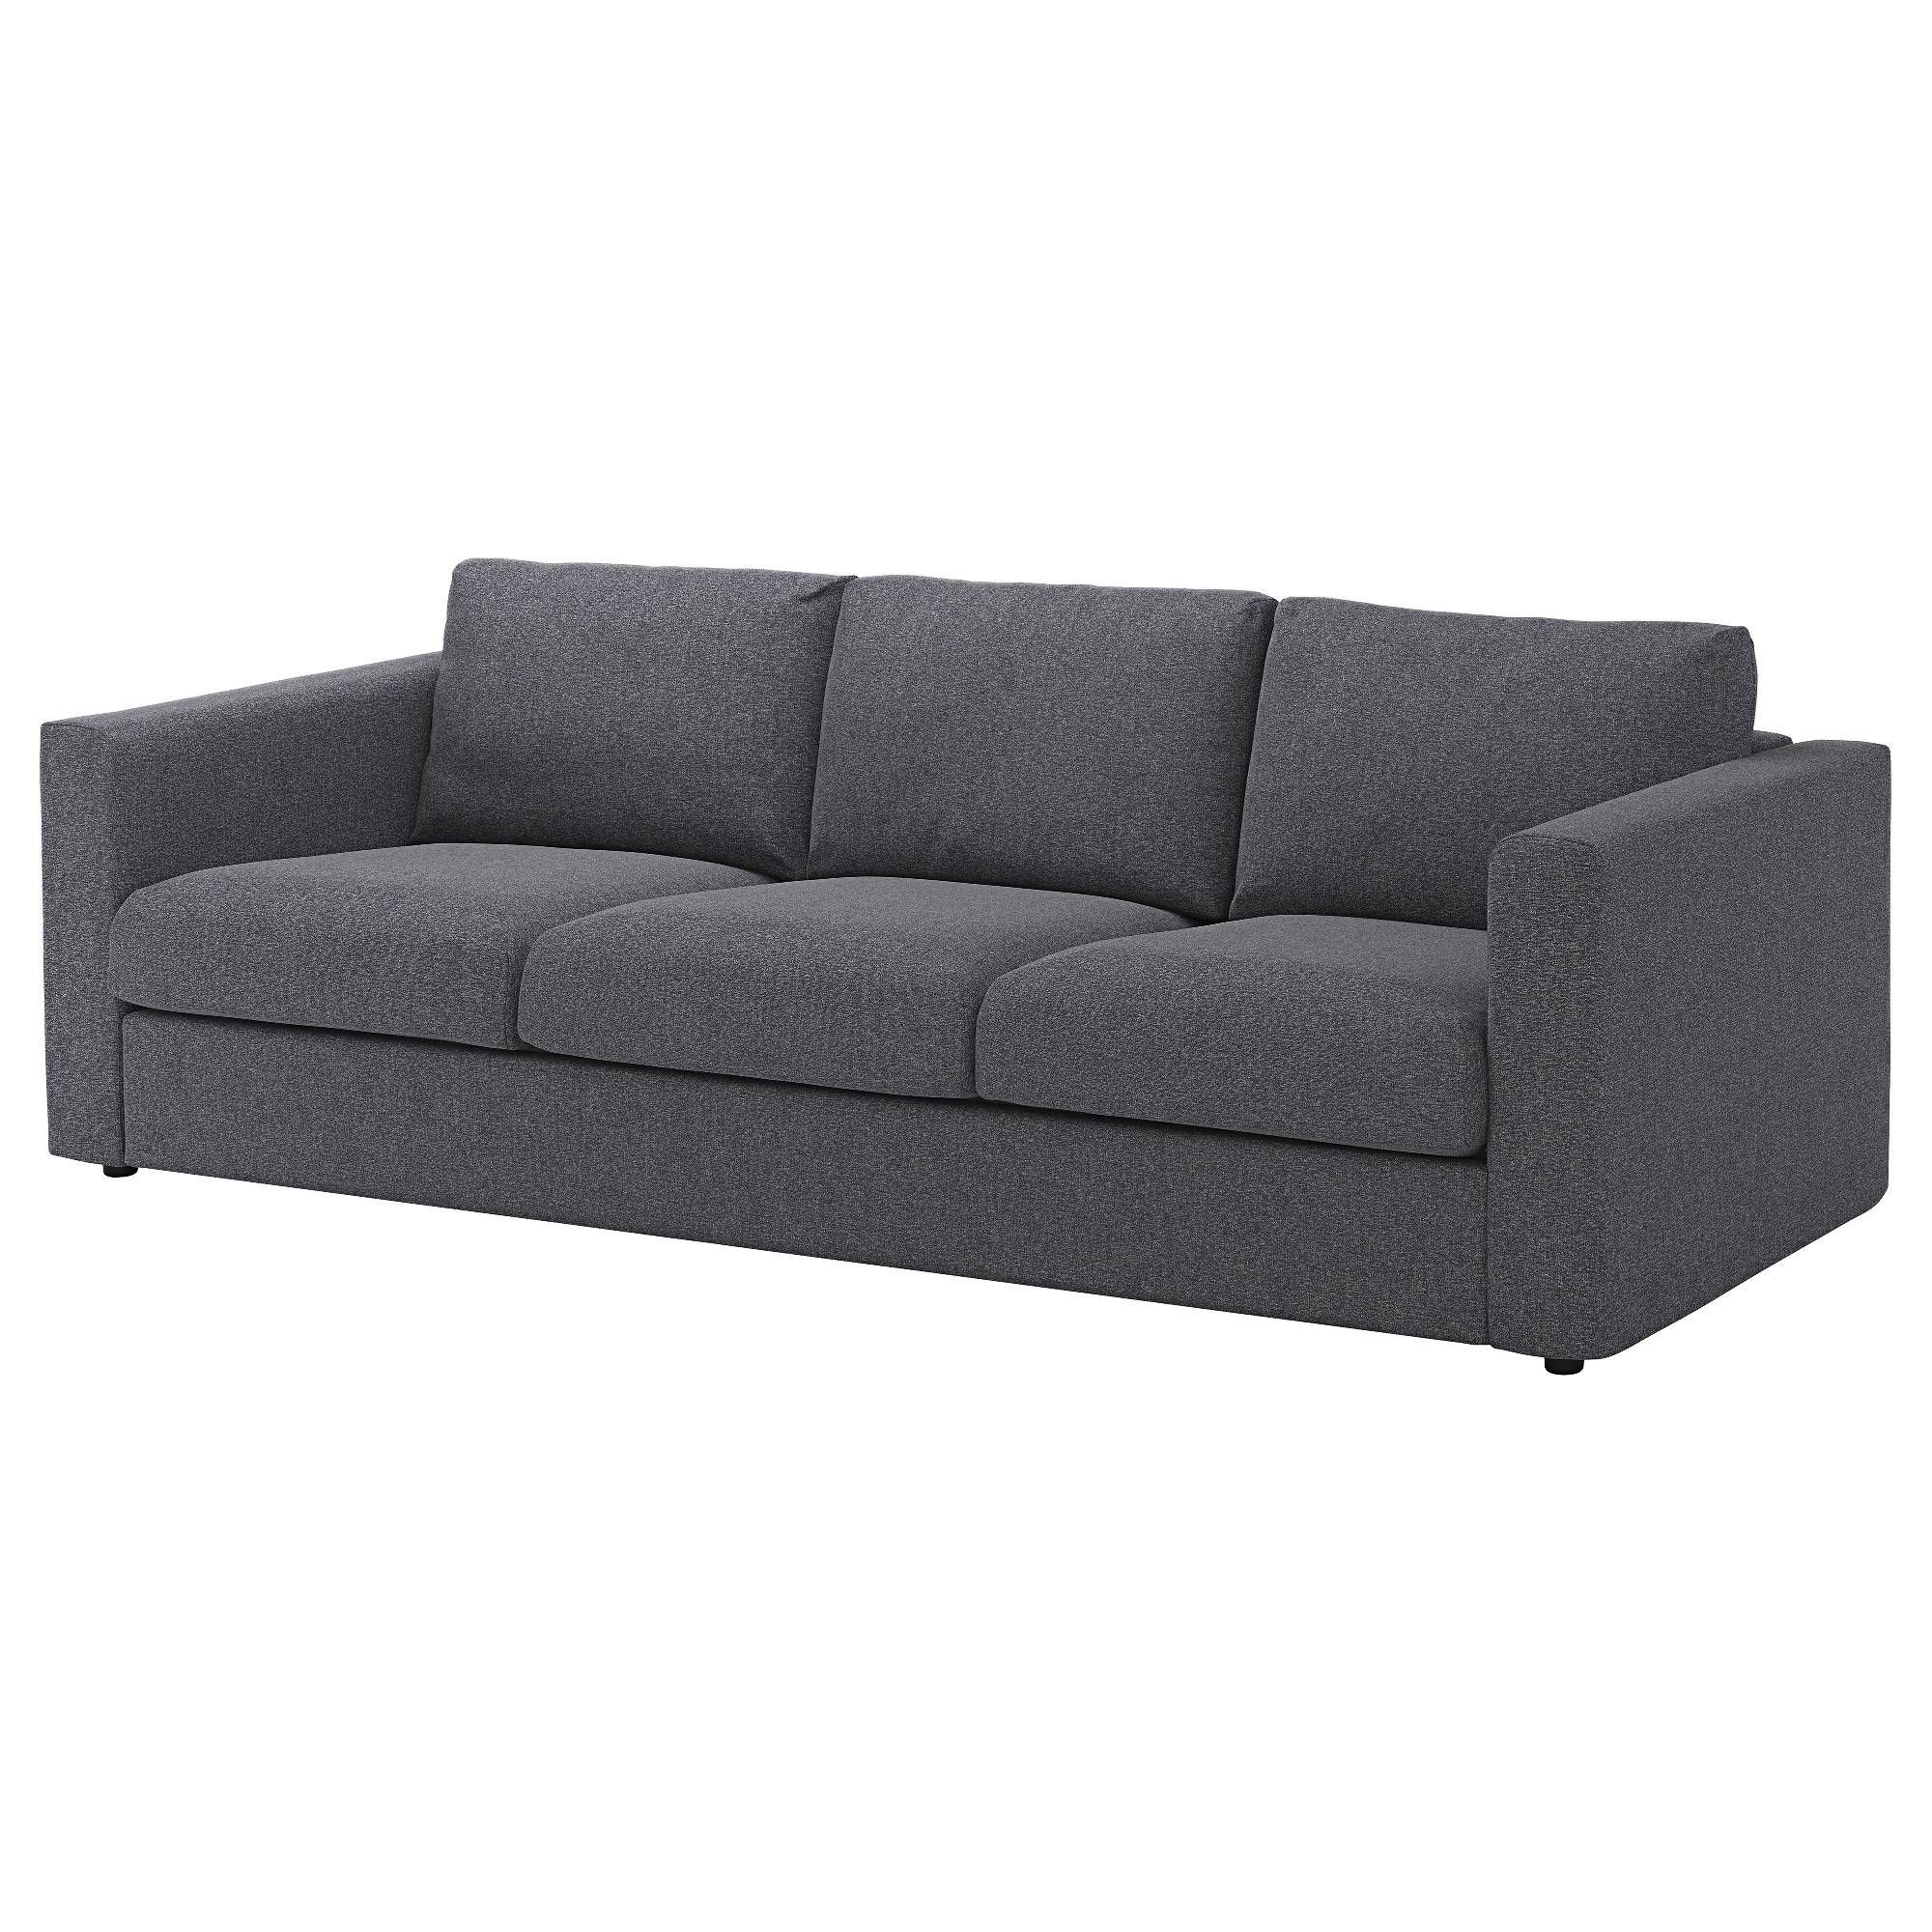 3 Seater Sofa | Ikea Intended For Three Seater Sofas (View 27 of 30)